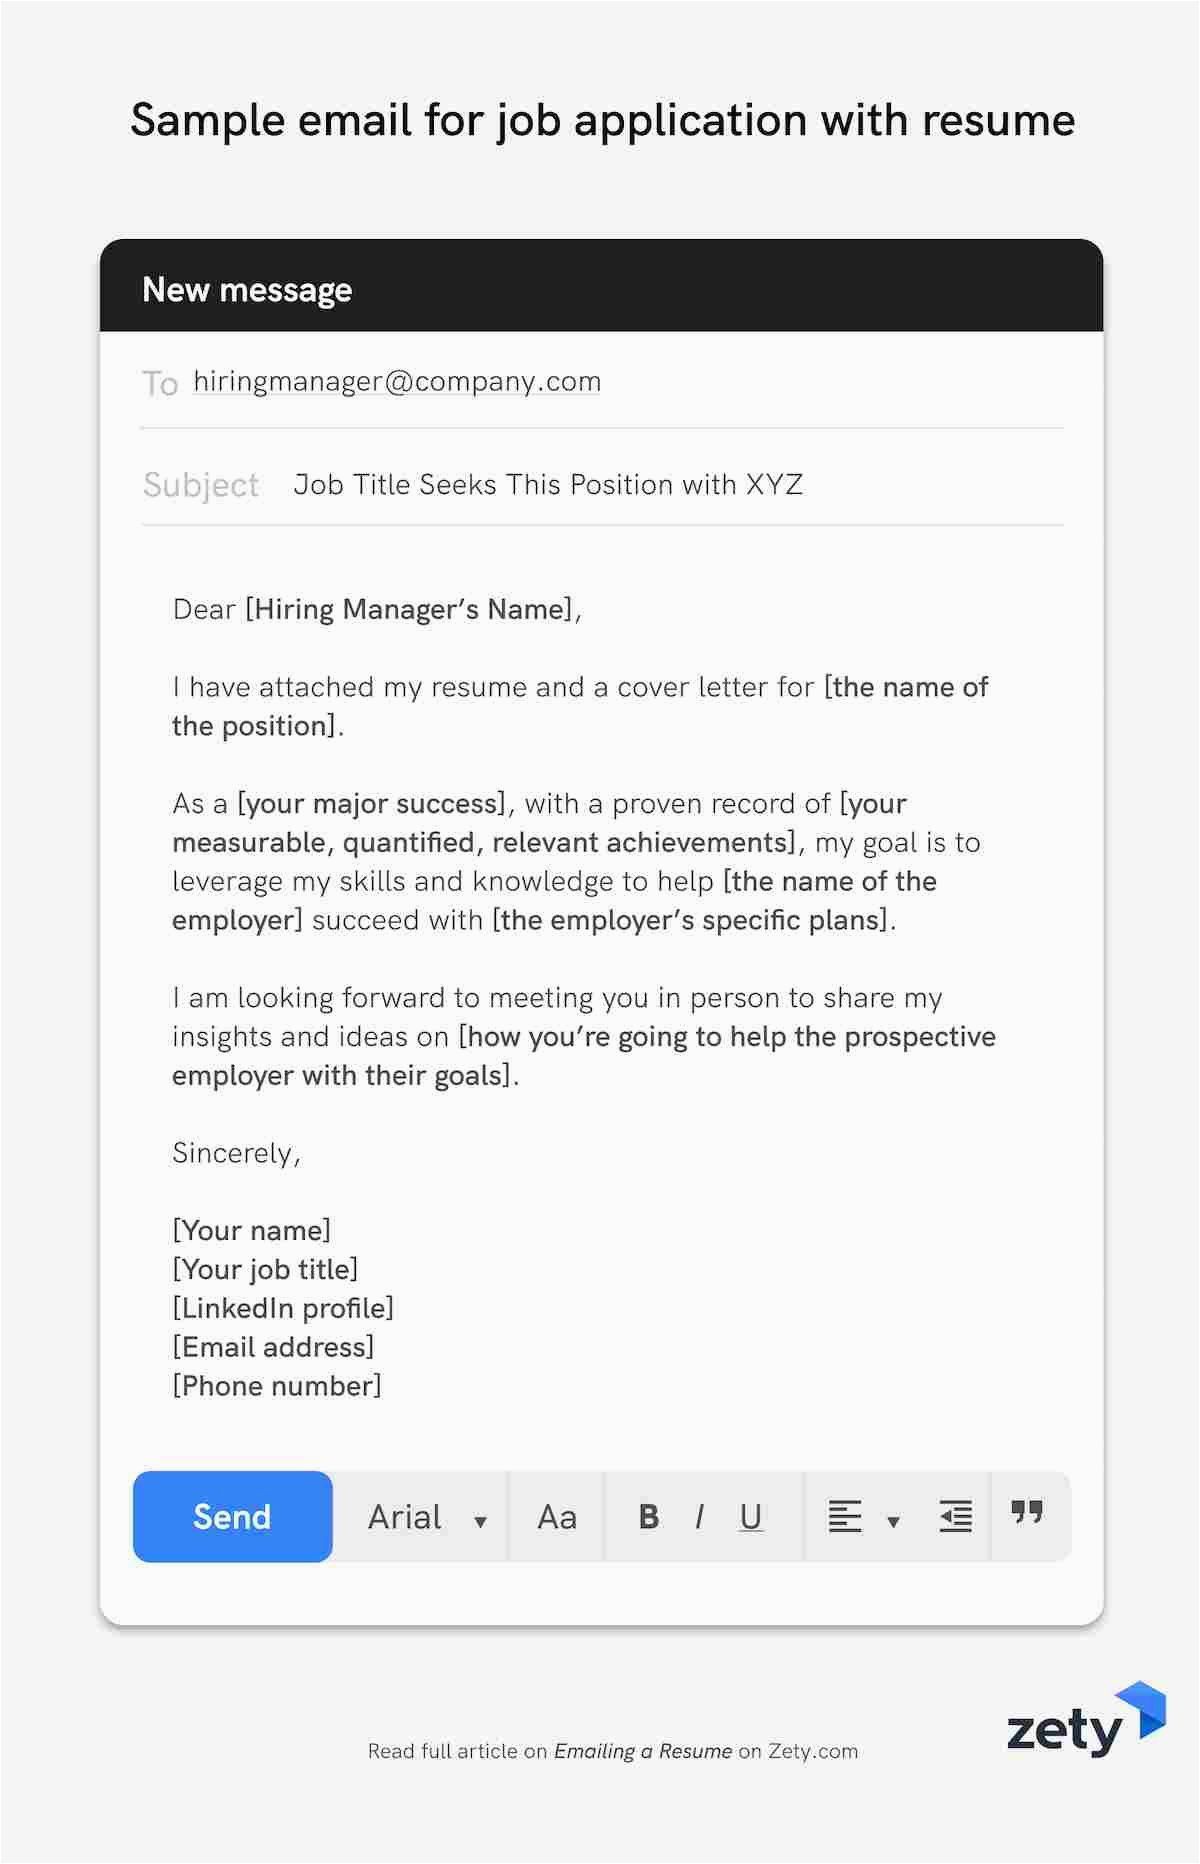 Sample Letter for Sending Resume by Email How to Email A Resume to An Employer 12 Email Examples